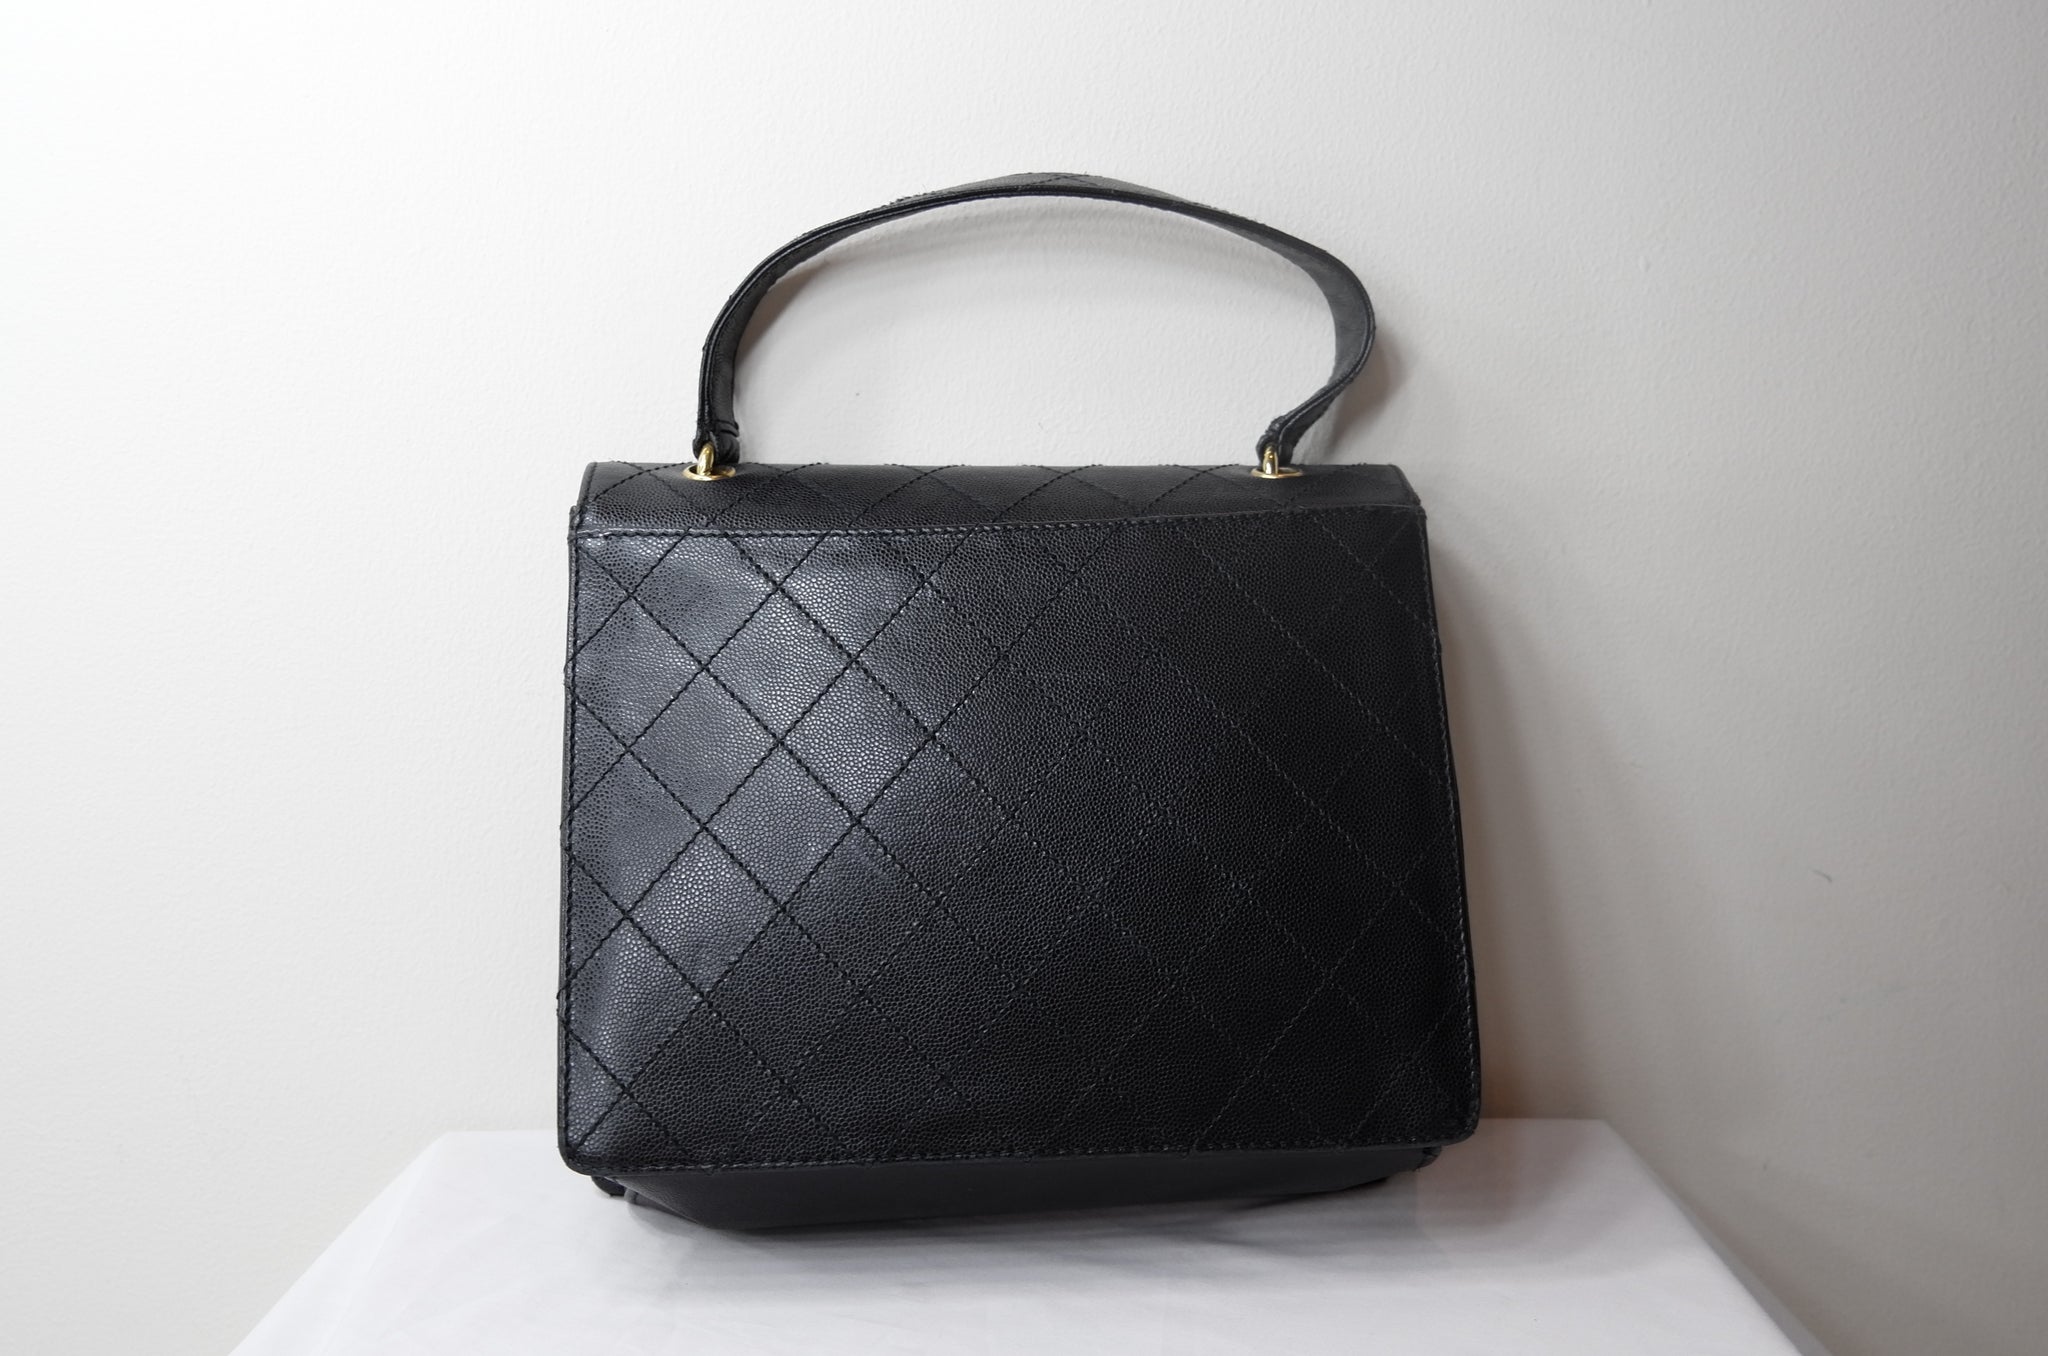 Chanel Black Caviar Quilted Leather Kelly Style Hand Bag - Mrs Vintage -  Selling Vintage Wedding Lace Dress / Gowns & Accessories from 1920s –  1990s. And many One of a kind